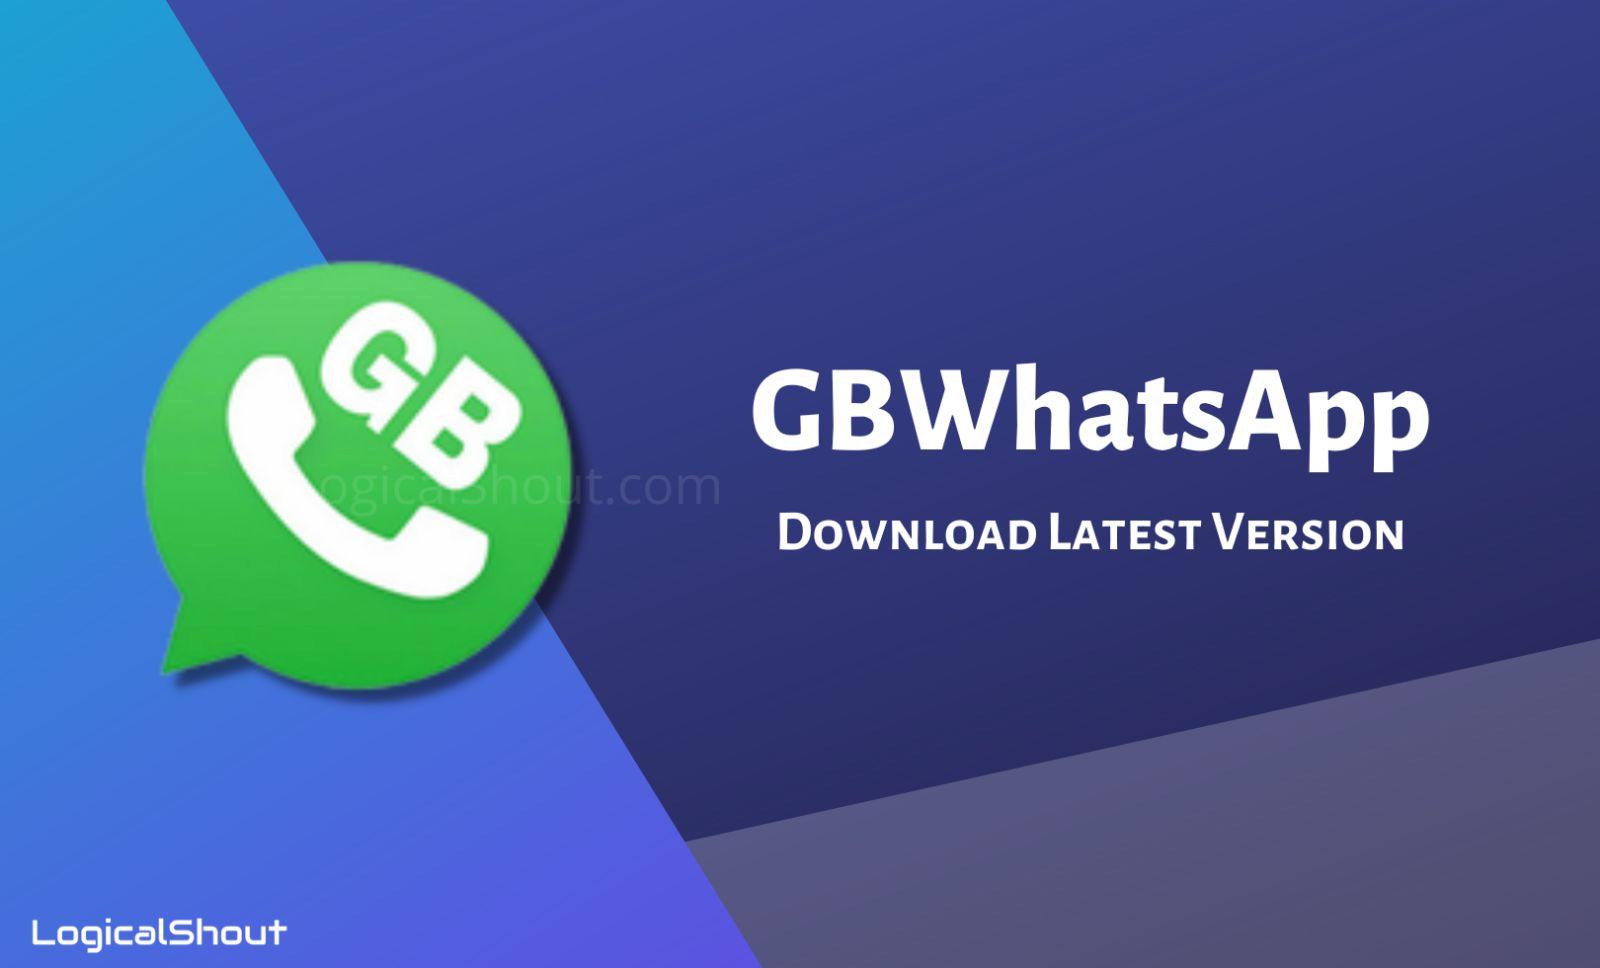 GBWhatsApp Download APK v19.32 (Updated) Apr 2022 – Official Latest (Anti-Ban)